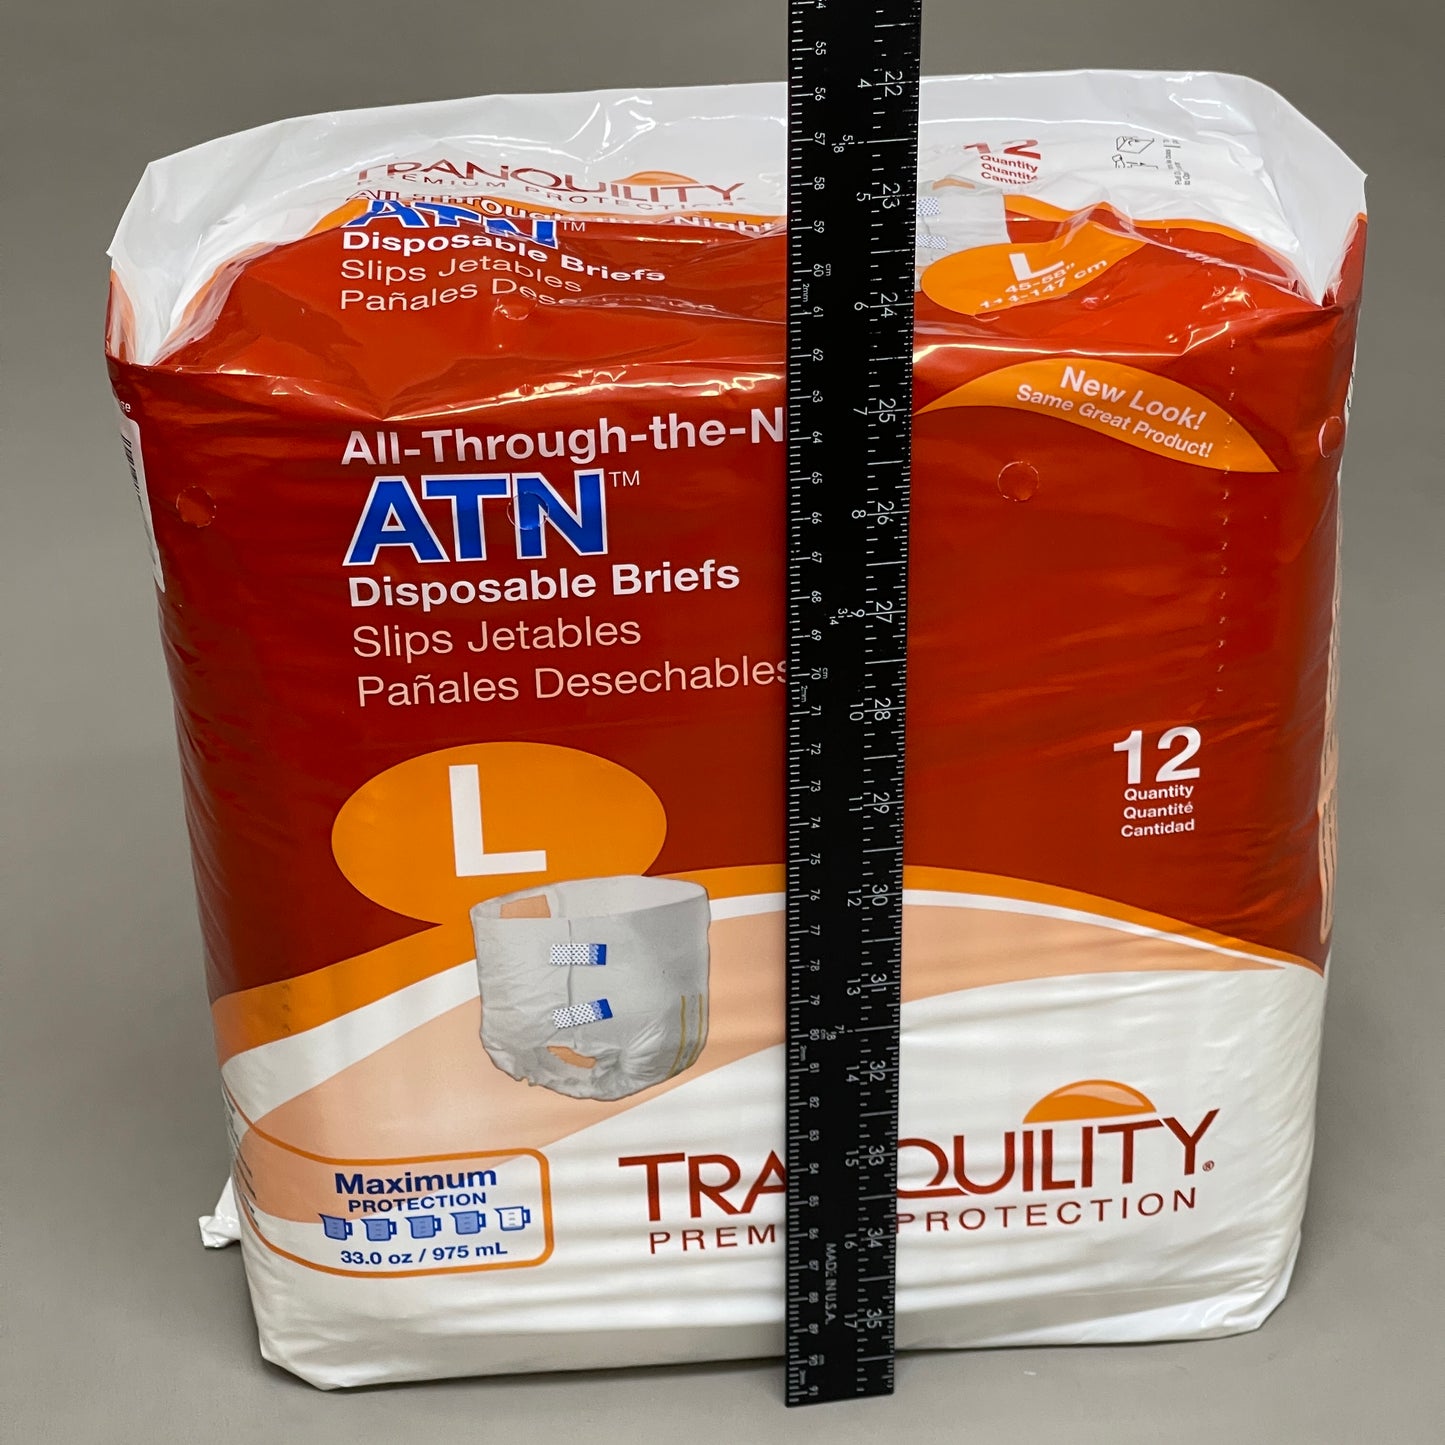 TRANQUILITY 96-PACK! All-Through-the-Night Disposable Briefs Sz L 48" - 58" 2186 (New)